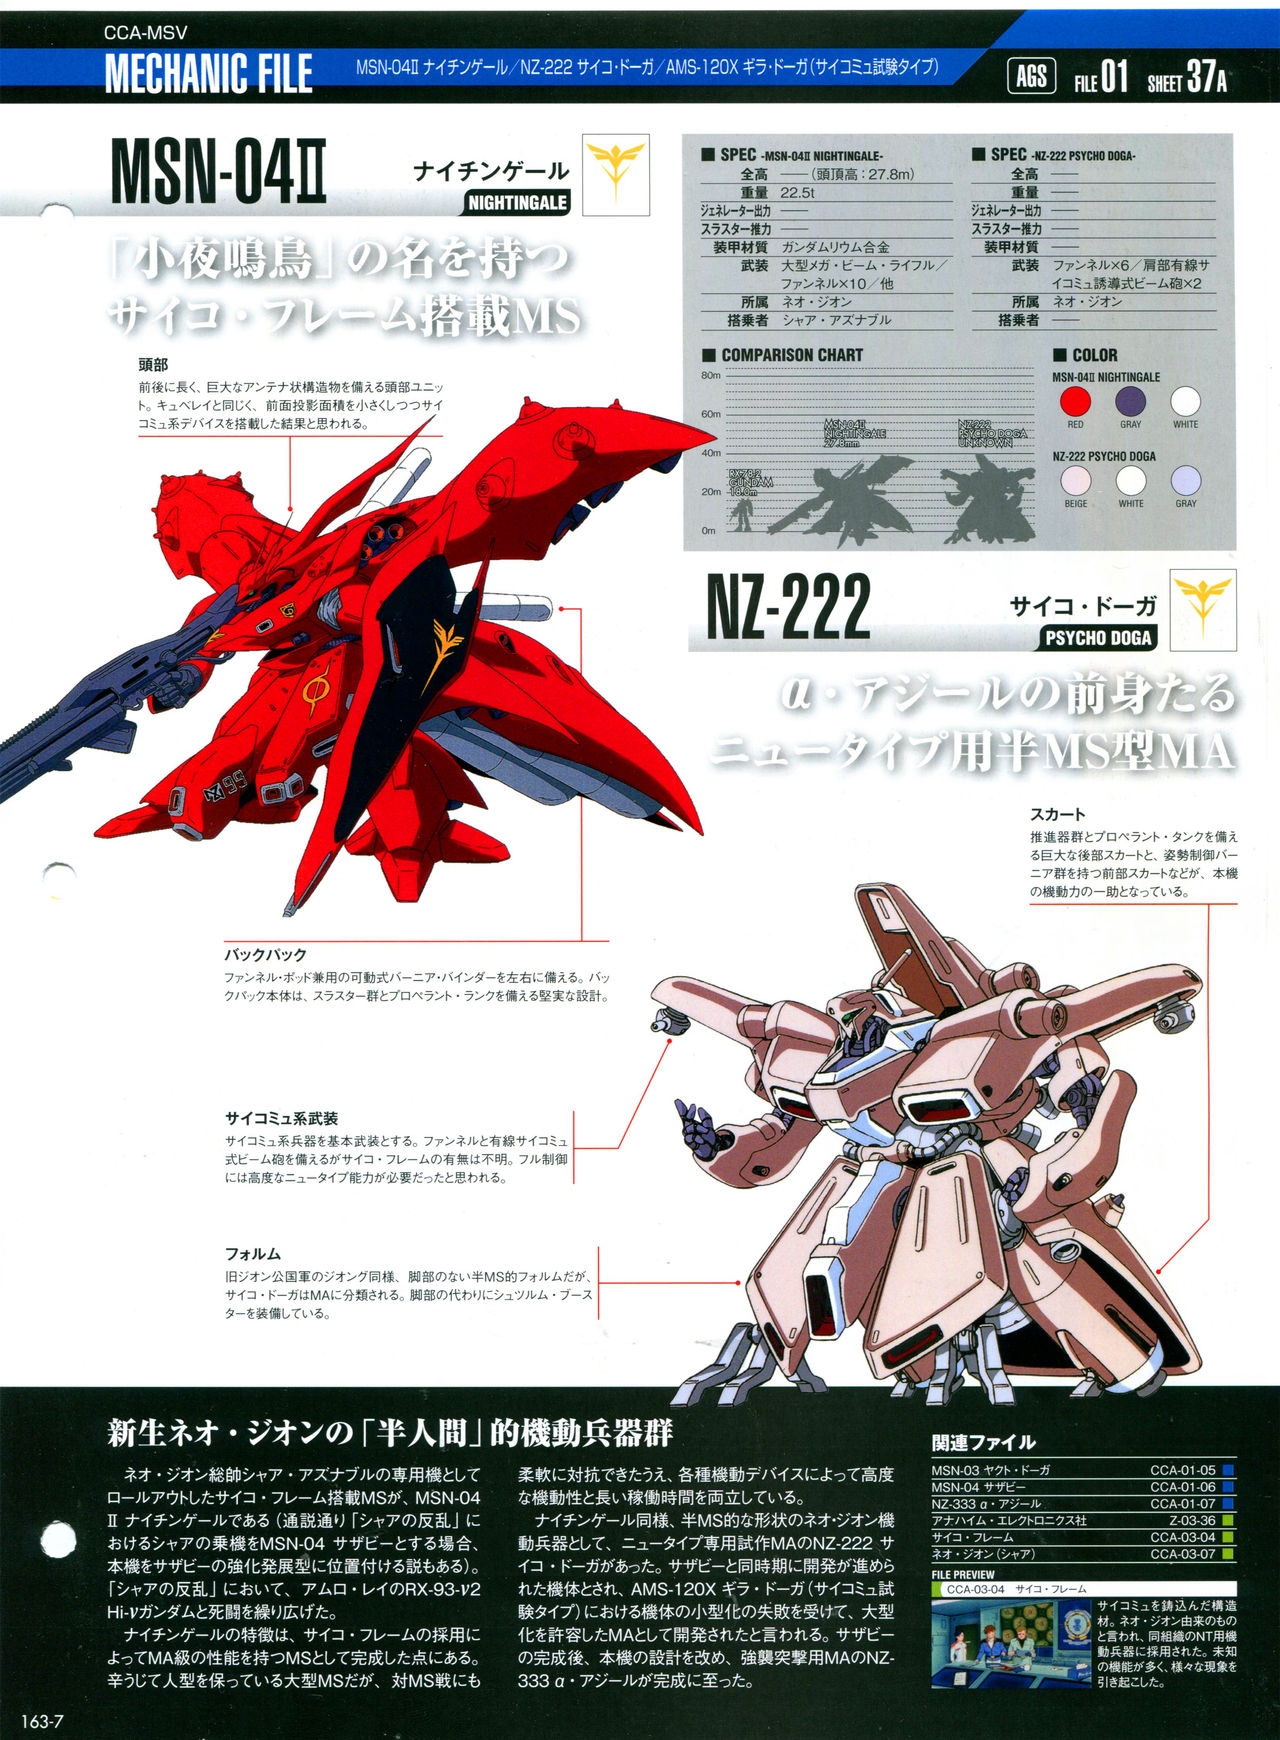 The Official Gundam Perfect File No.163 8